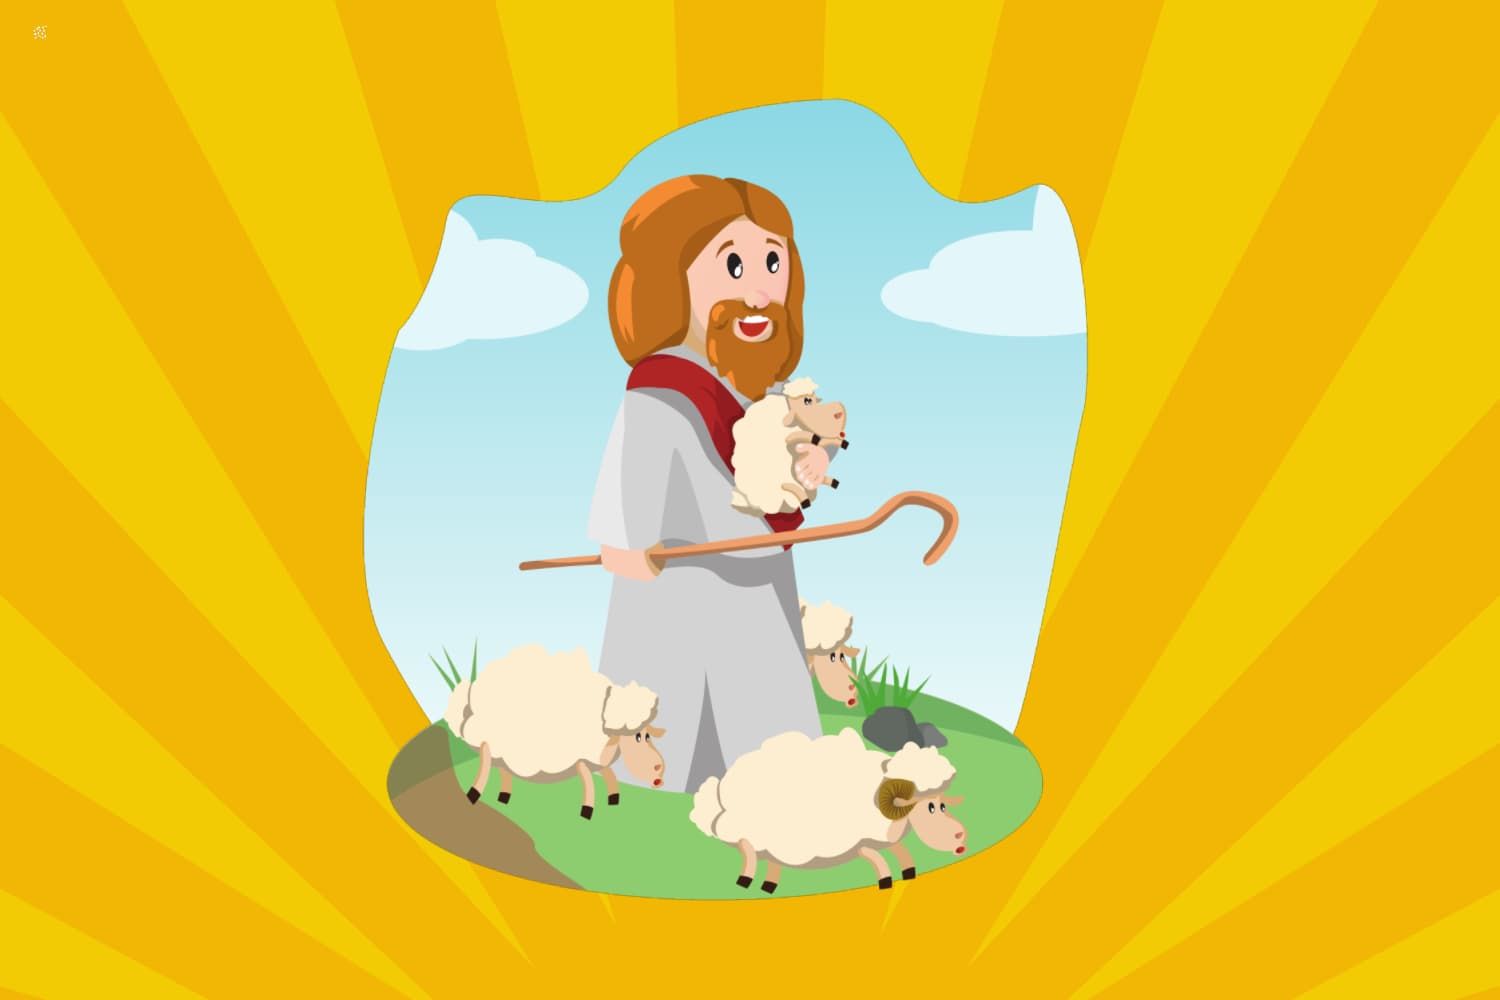 Childrens%20moment%20-%20NT%20Teaching%20on%20the%20good%20shepherd%20-%20Recognizing%20the%20shepherds%20voice%202-62442aa4 Helping / being helpful